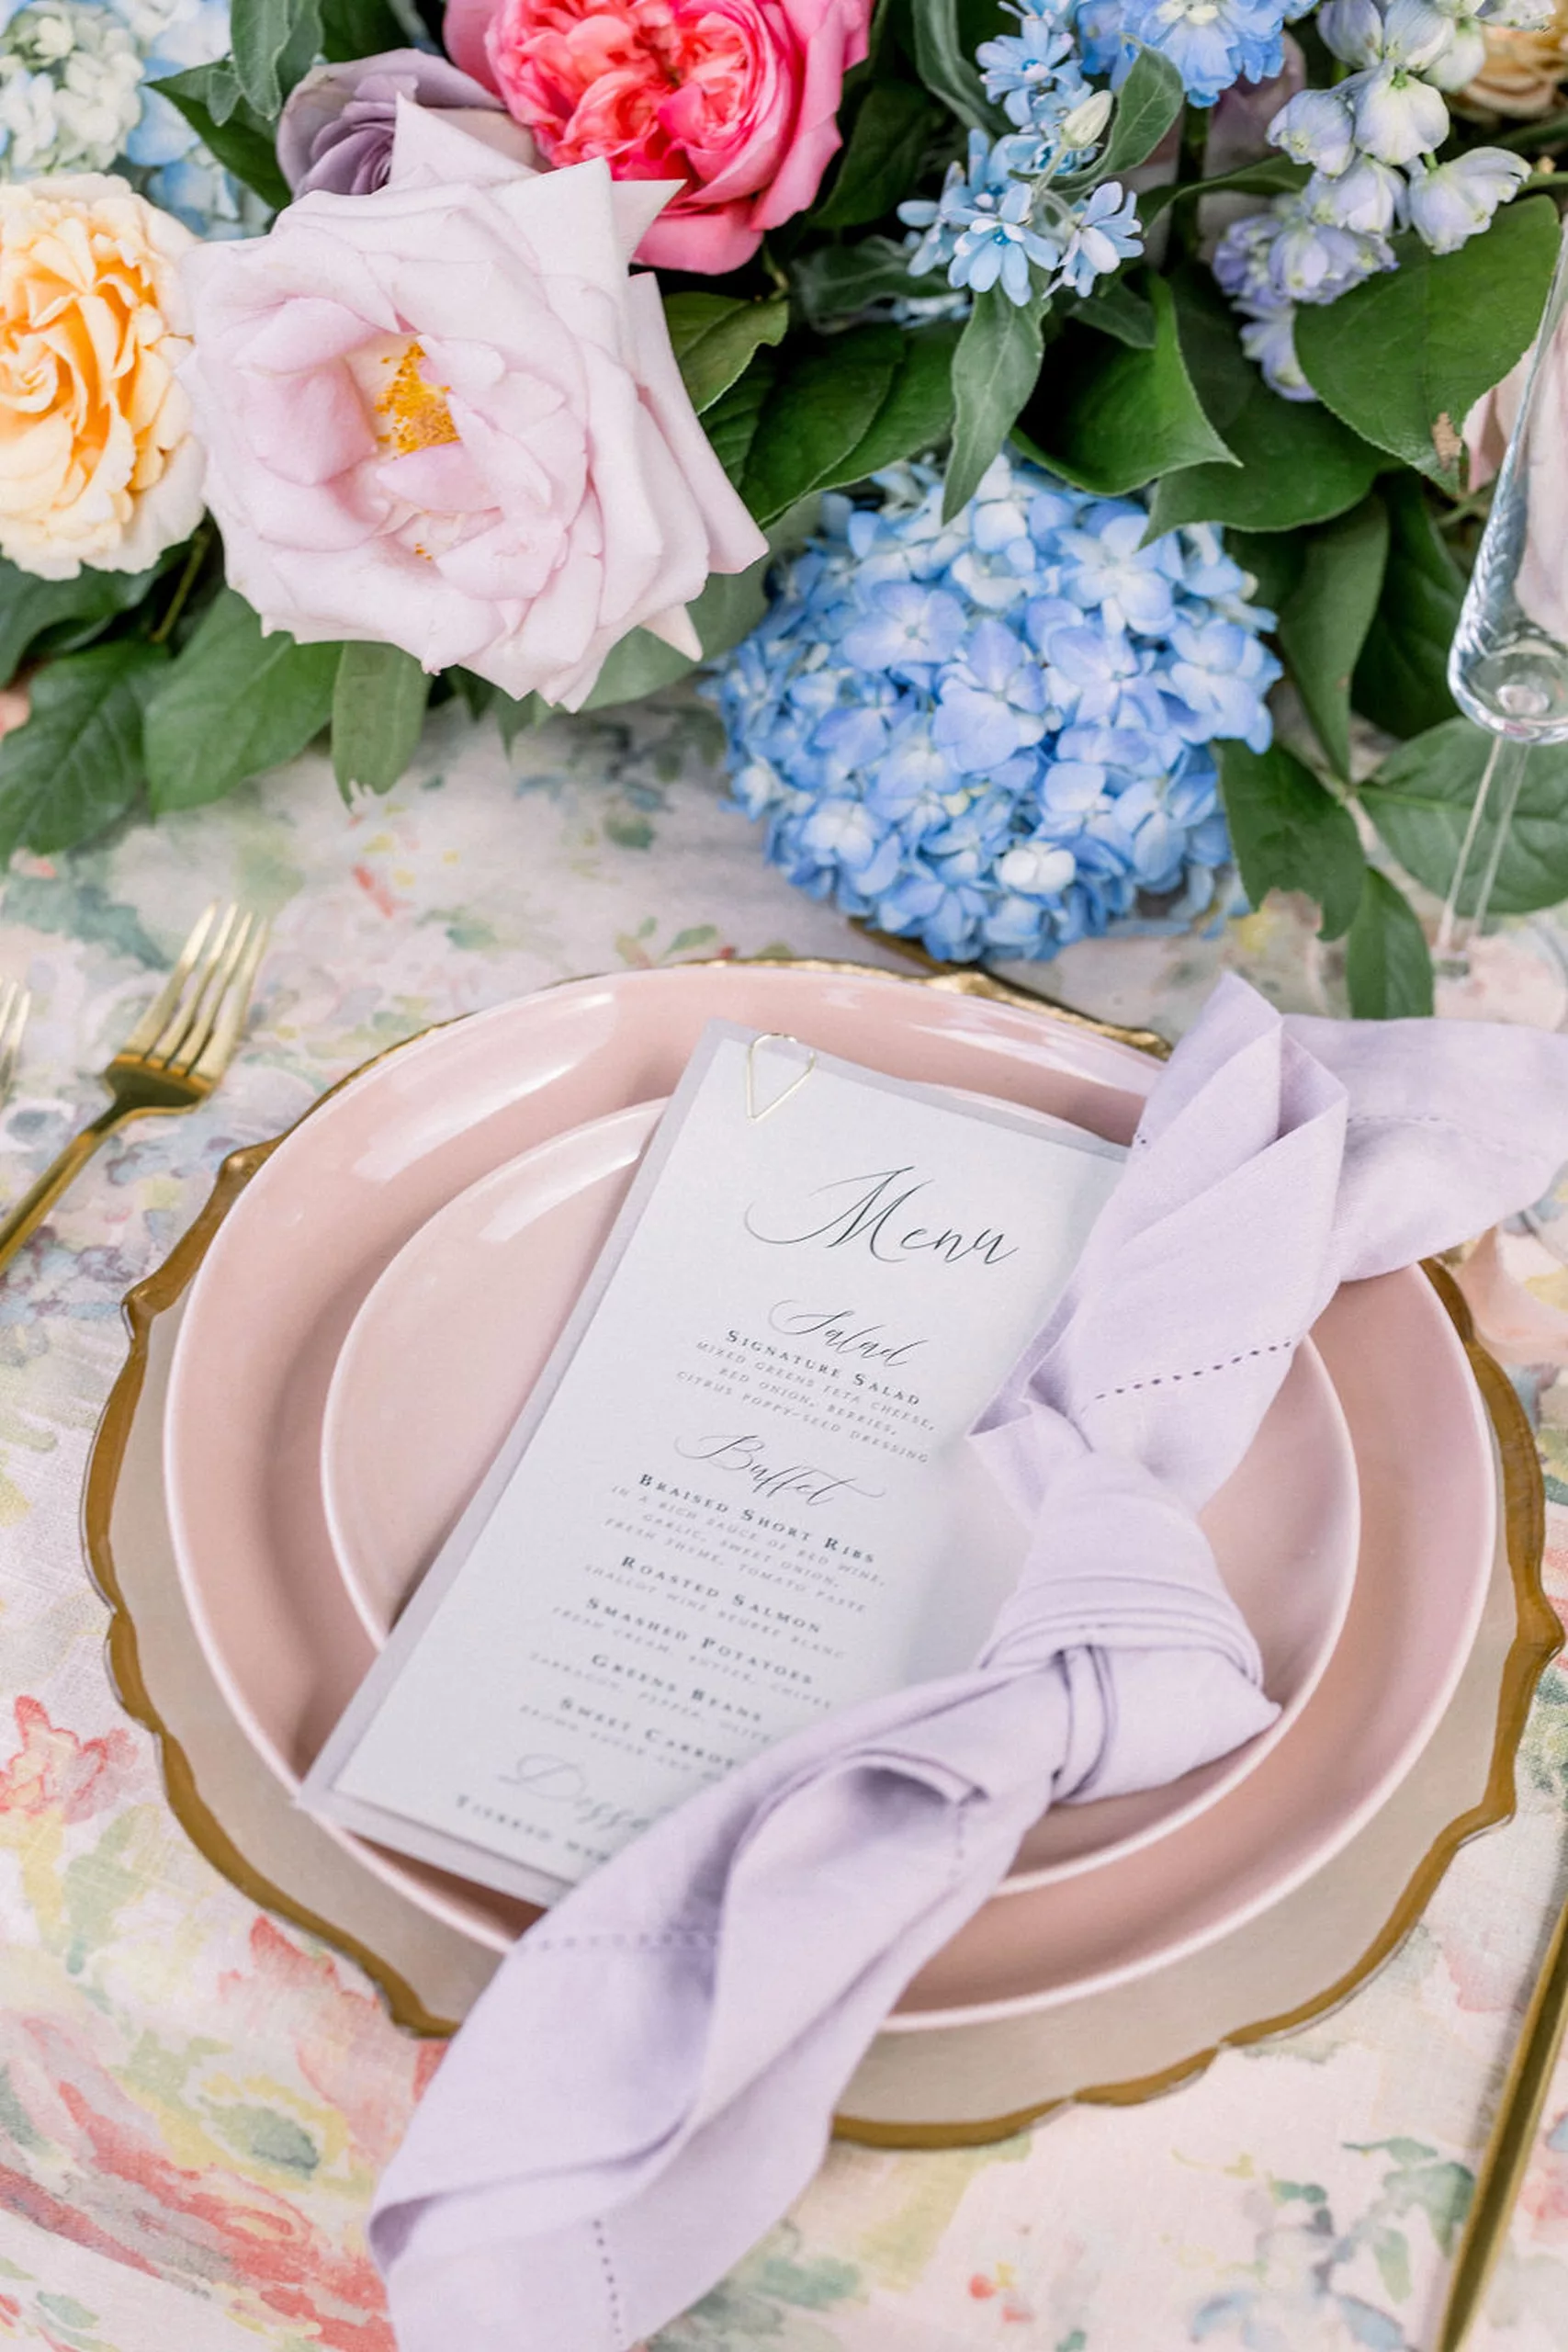 Details of a table setting with pink plate and linen and colorful florals